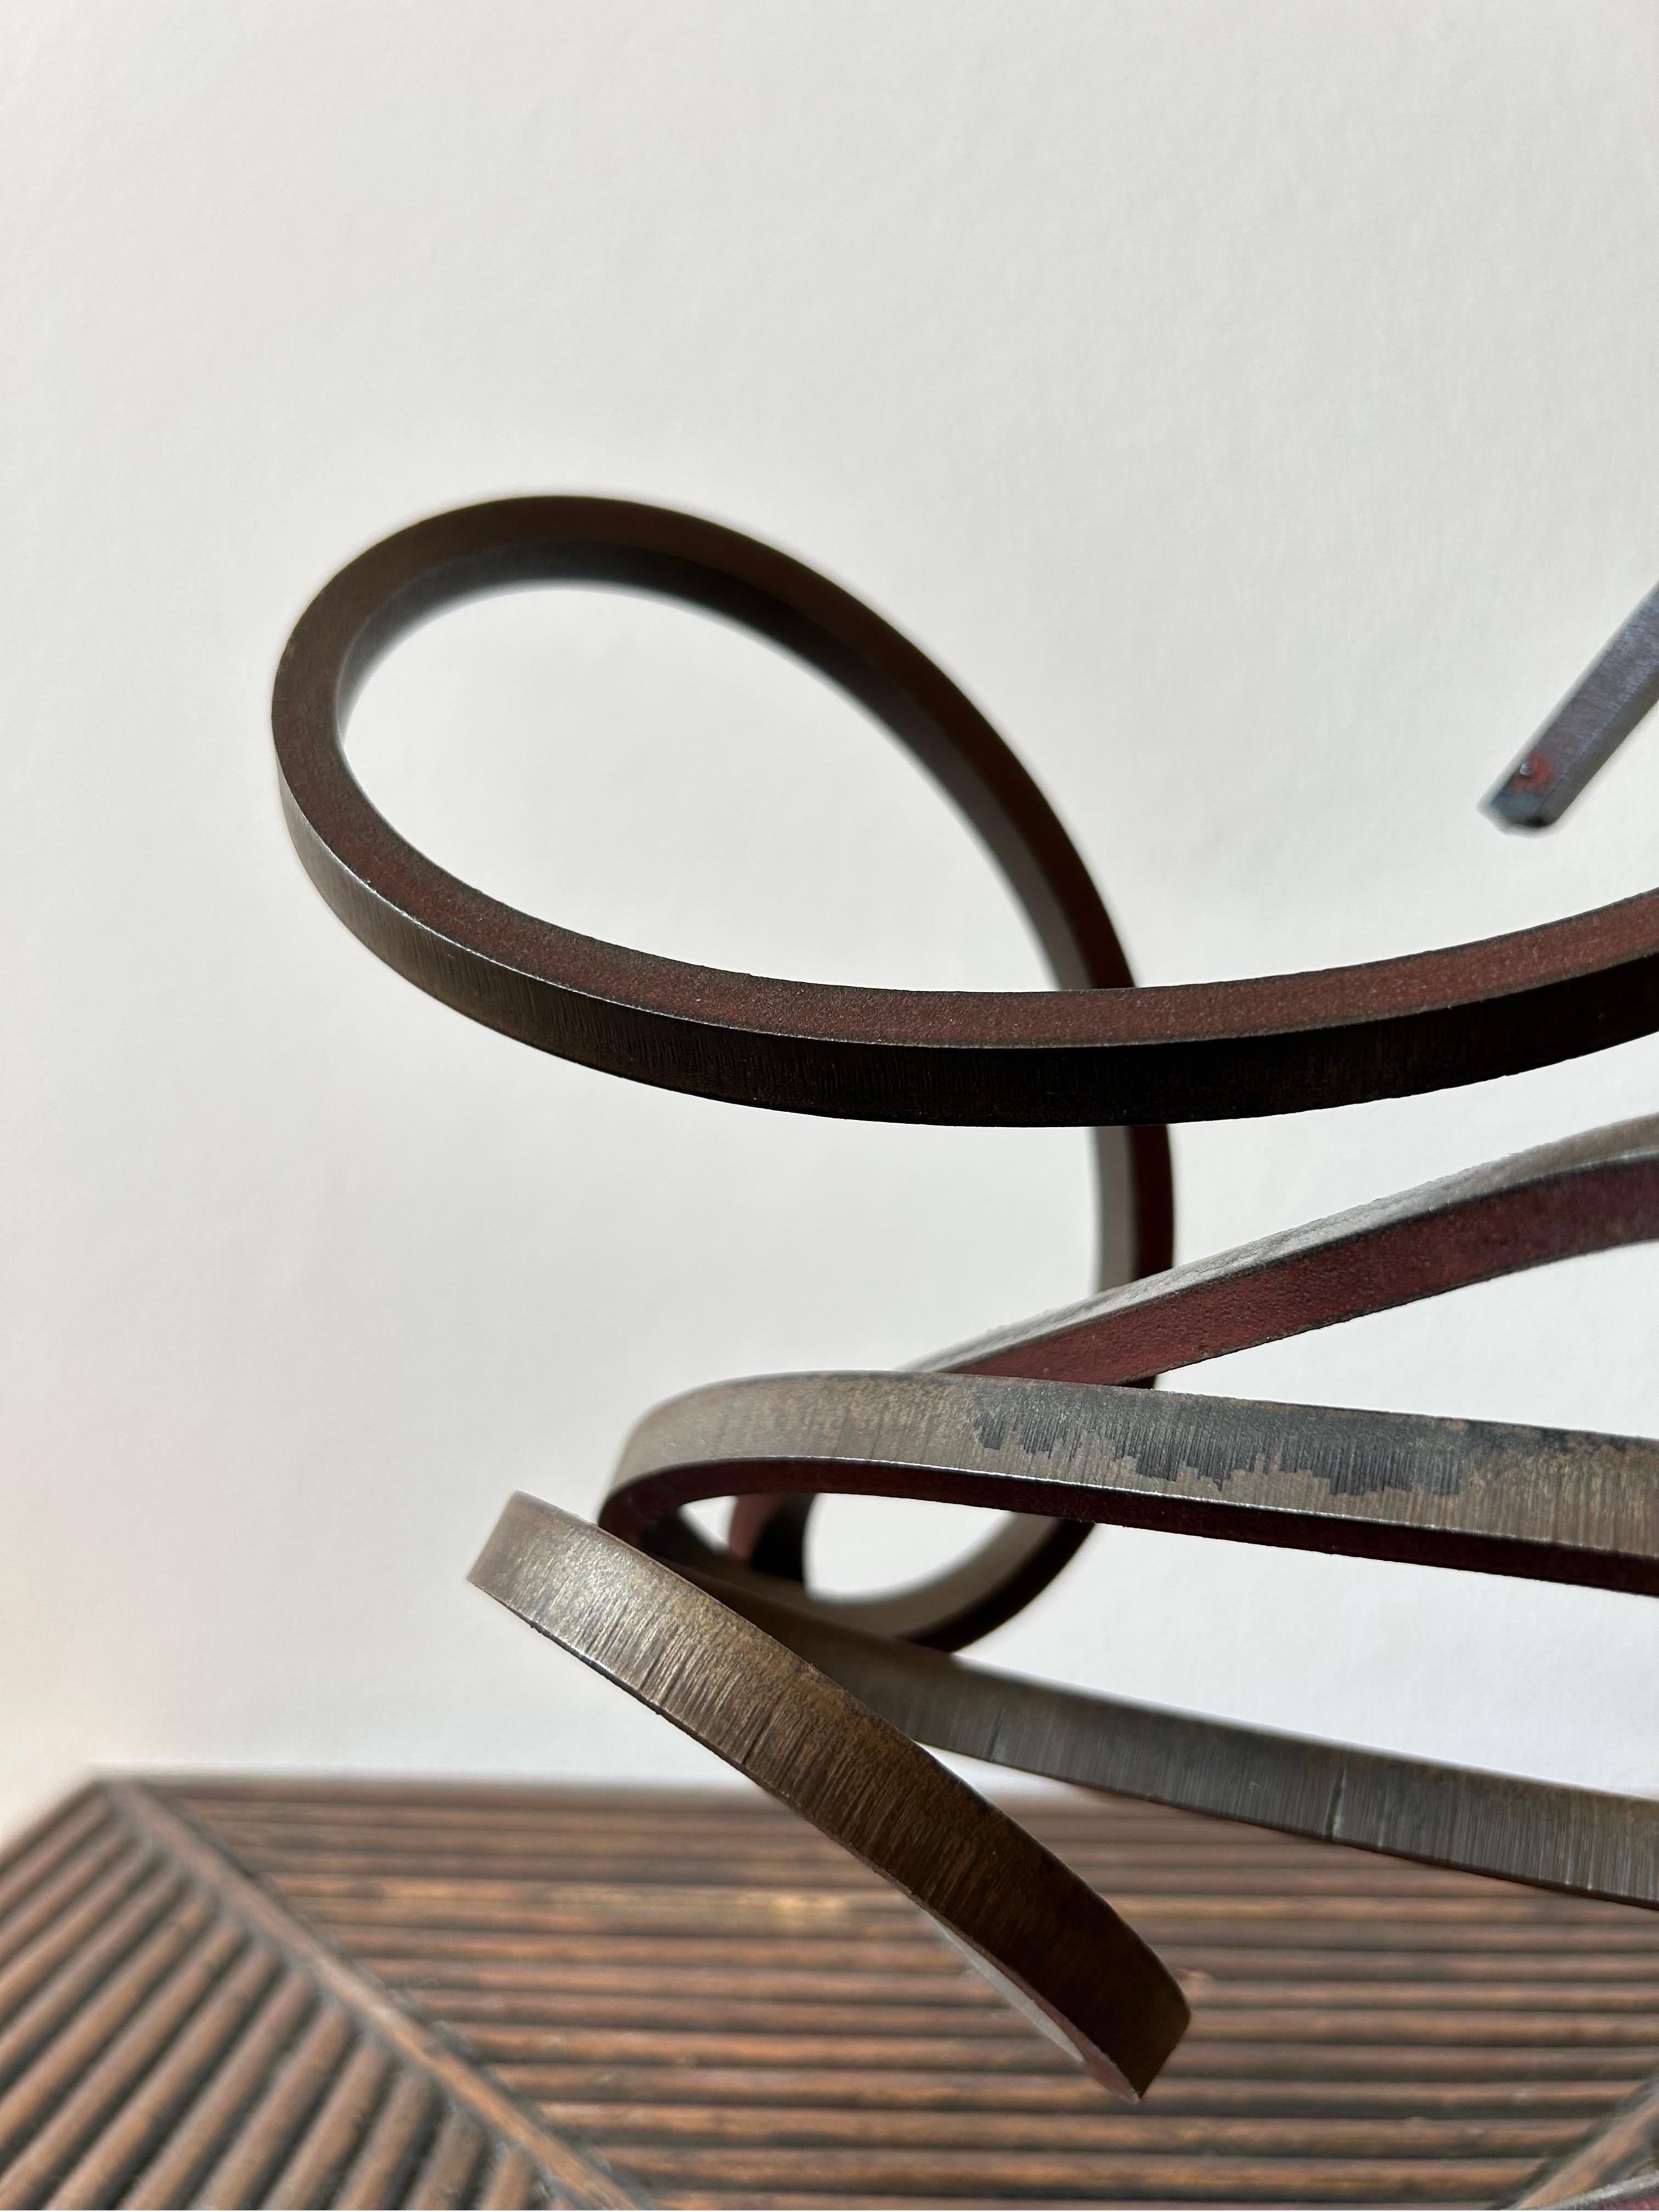 Rare abstract steel sculpture made in Denmark in the 1960s by a unknown Danish artist.
The sculpture is made of cast iron and has over the years Gotten a beautiful patina.

The sculpture has similarities to pieces by other Danish artist like